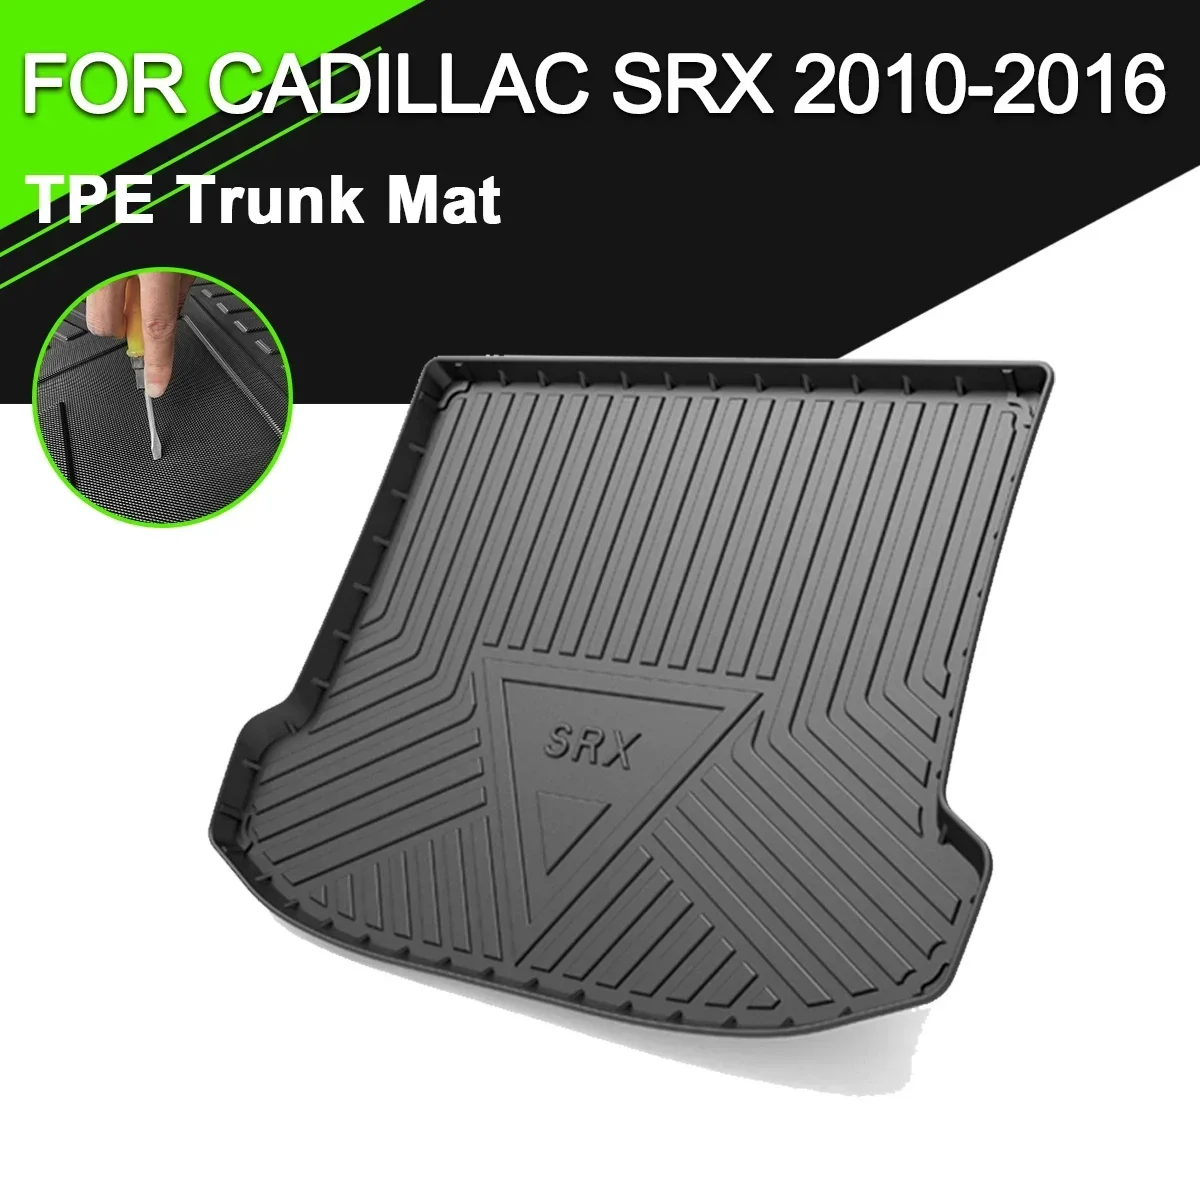 

Car Rear Trunk Cover Mat Rubber TPE Non-Slip Waterproof Cargo Liner Accessories For Cadillac SRX 2010-2016